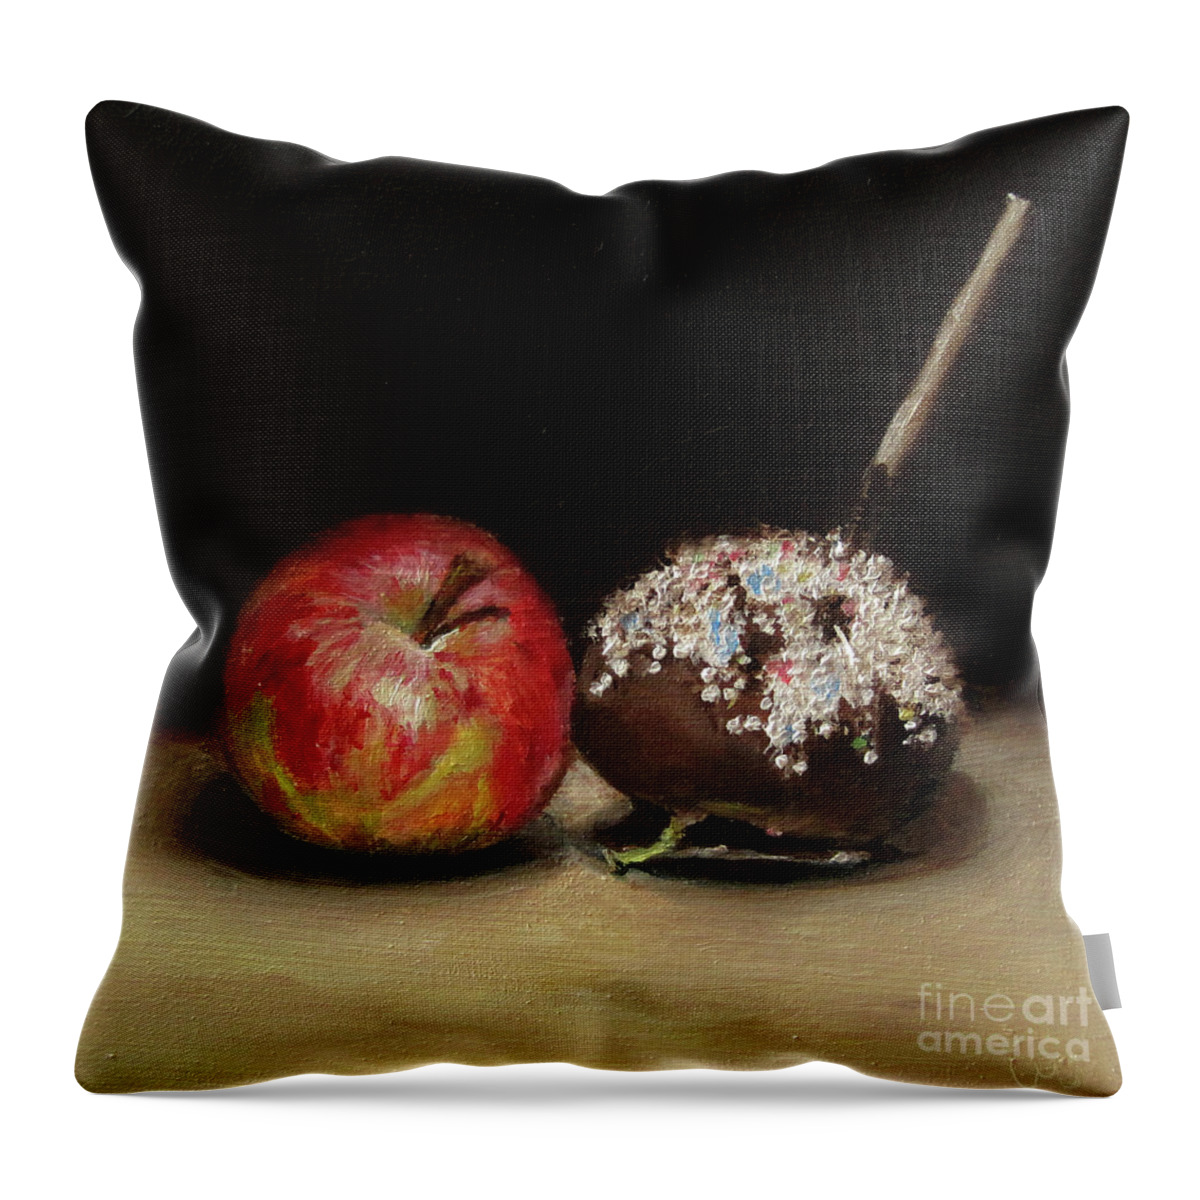 Apple Throw Pillow featuring the painting Apple and Chocolate by Ulrike Miesen-Schuermann